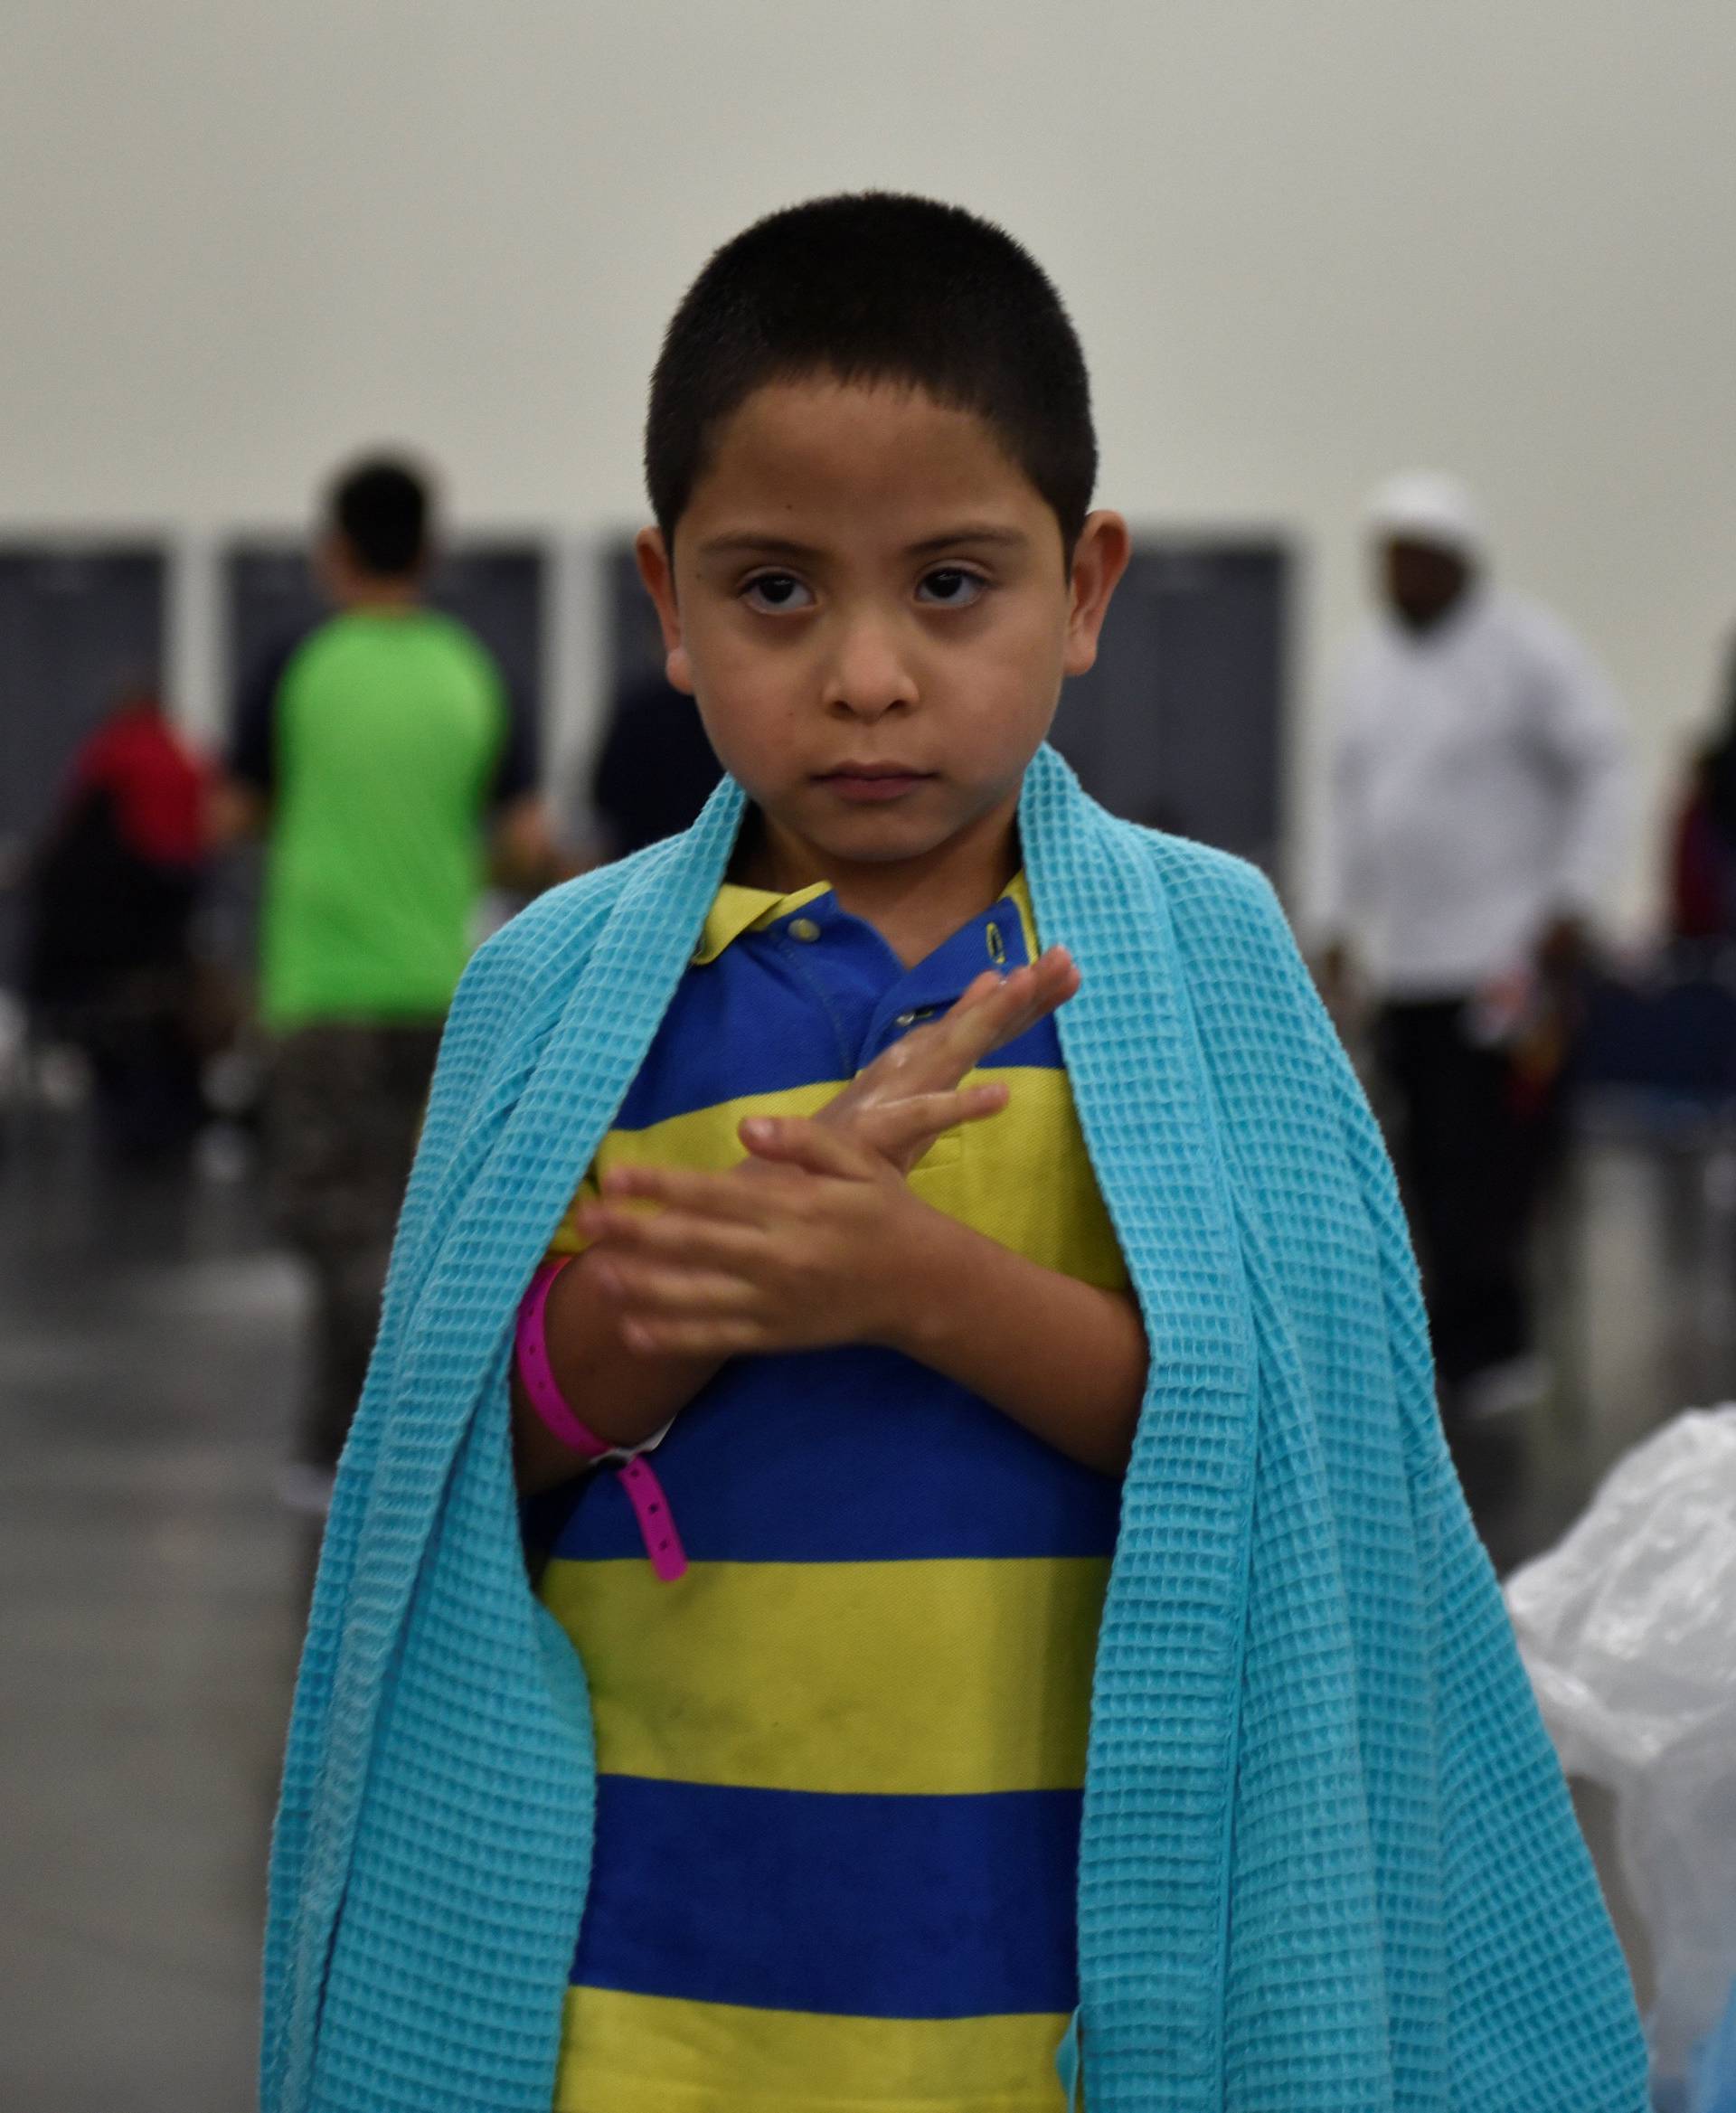 Evacuee Pete Quintana Jr. is wrapped in a blanket at the George R. Brown Convention Center after Hurricane Harvey inundated the Texas Gulf coast with rain causing widespread flooding, in Houston